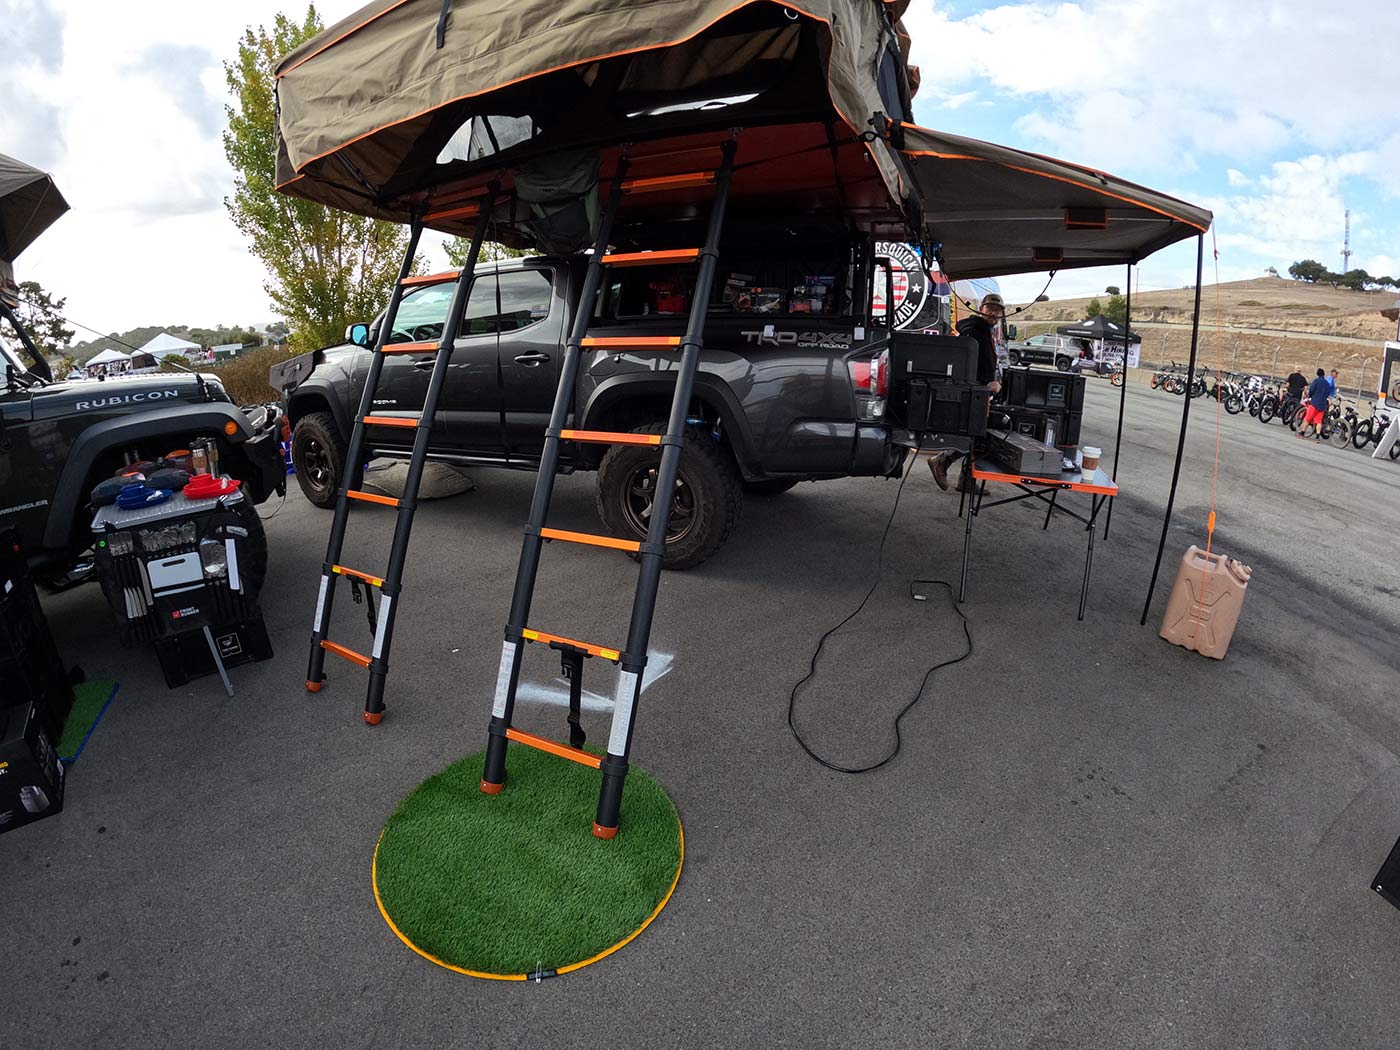 GTFO overland supplies and darche rooftop tents and vehicle canopies for car camping